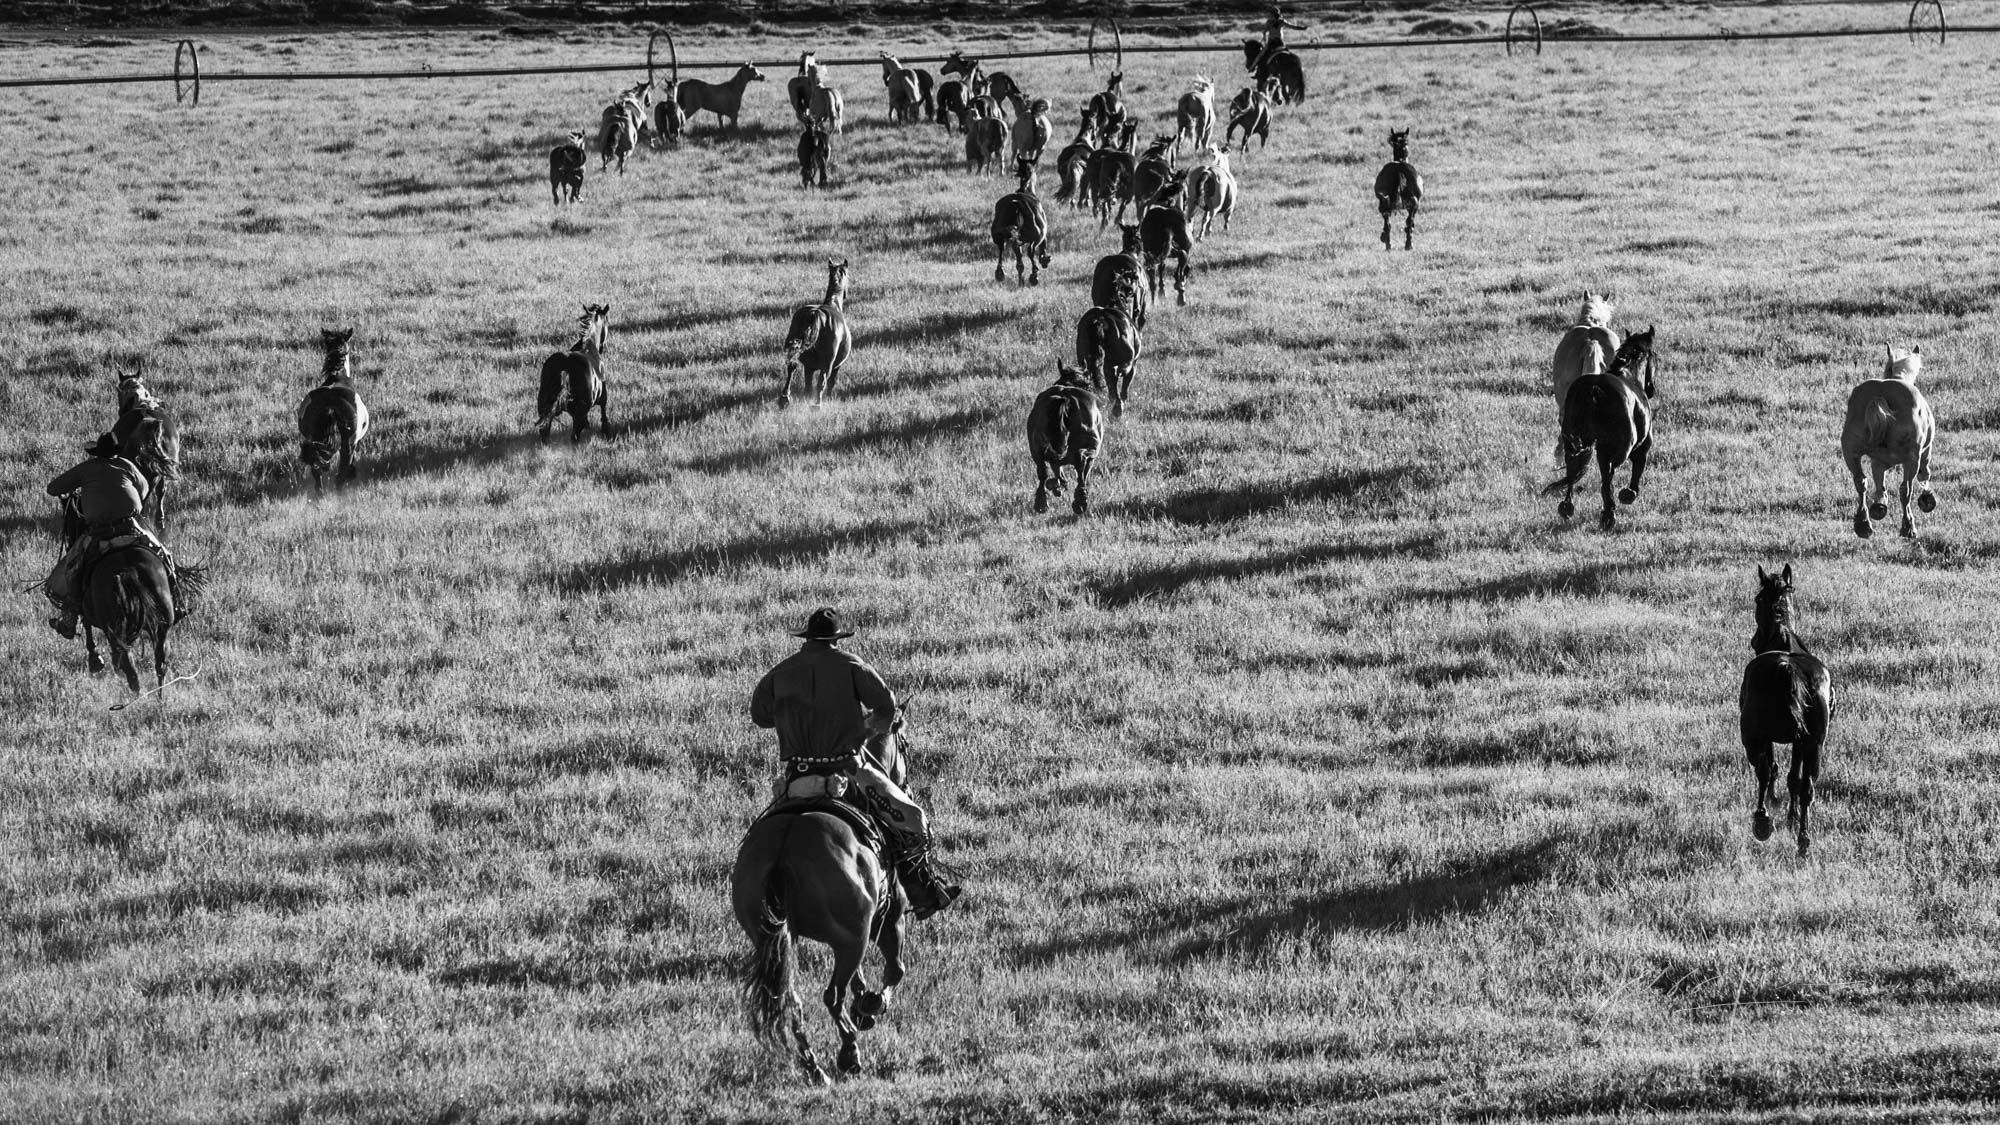 Fine Art Limited Edition Photo Prints of Cowboys, Horses, and life in the West. Get em ! A Cowboy picture in black and white....